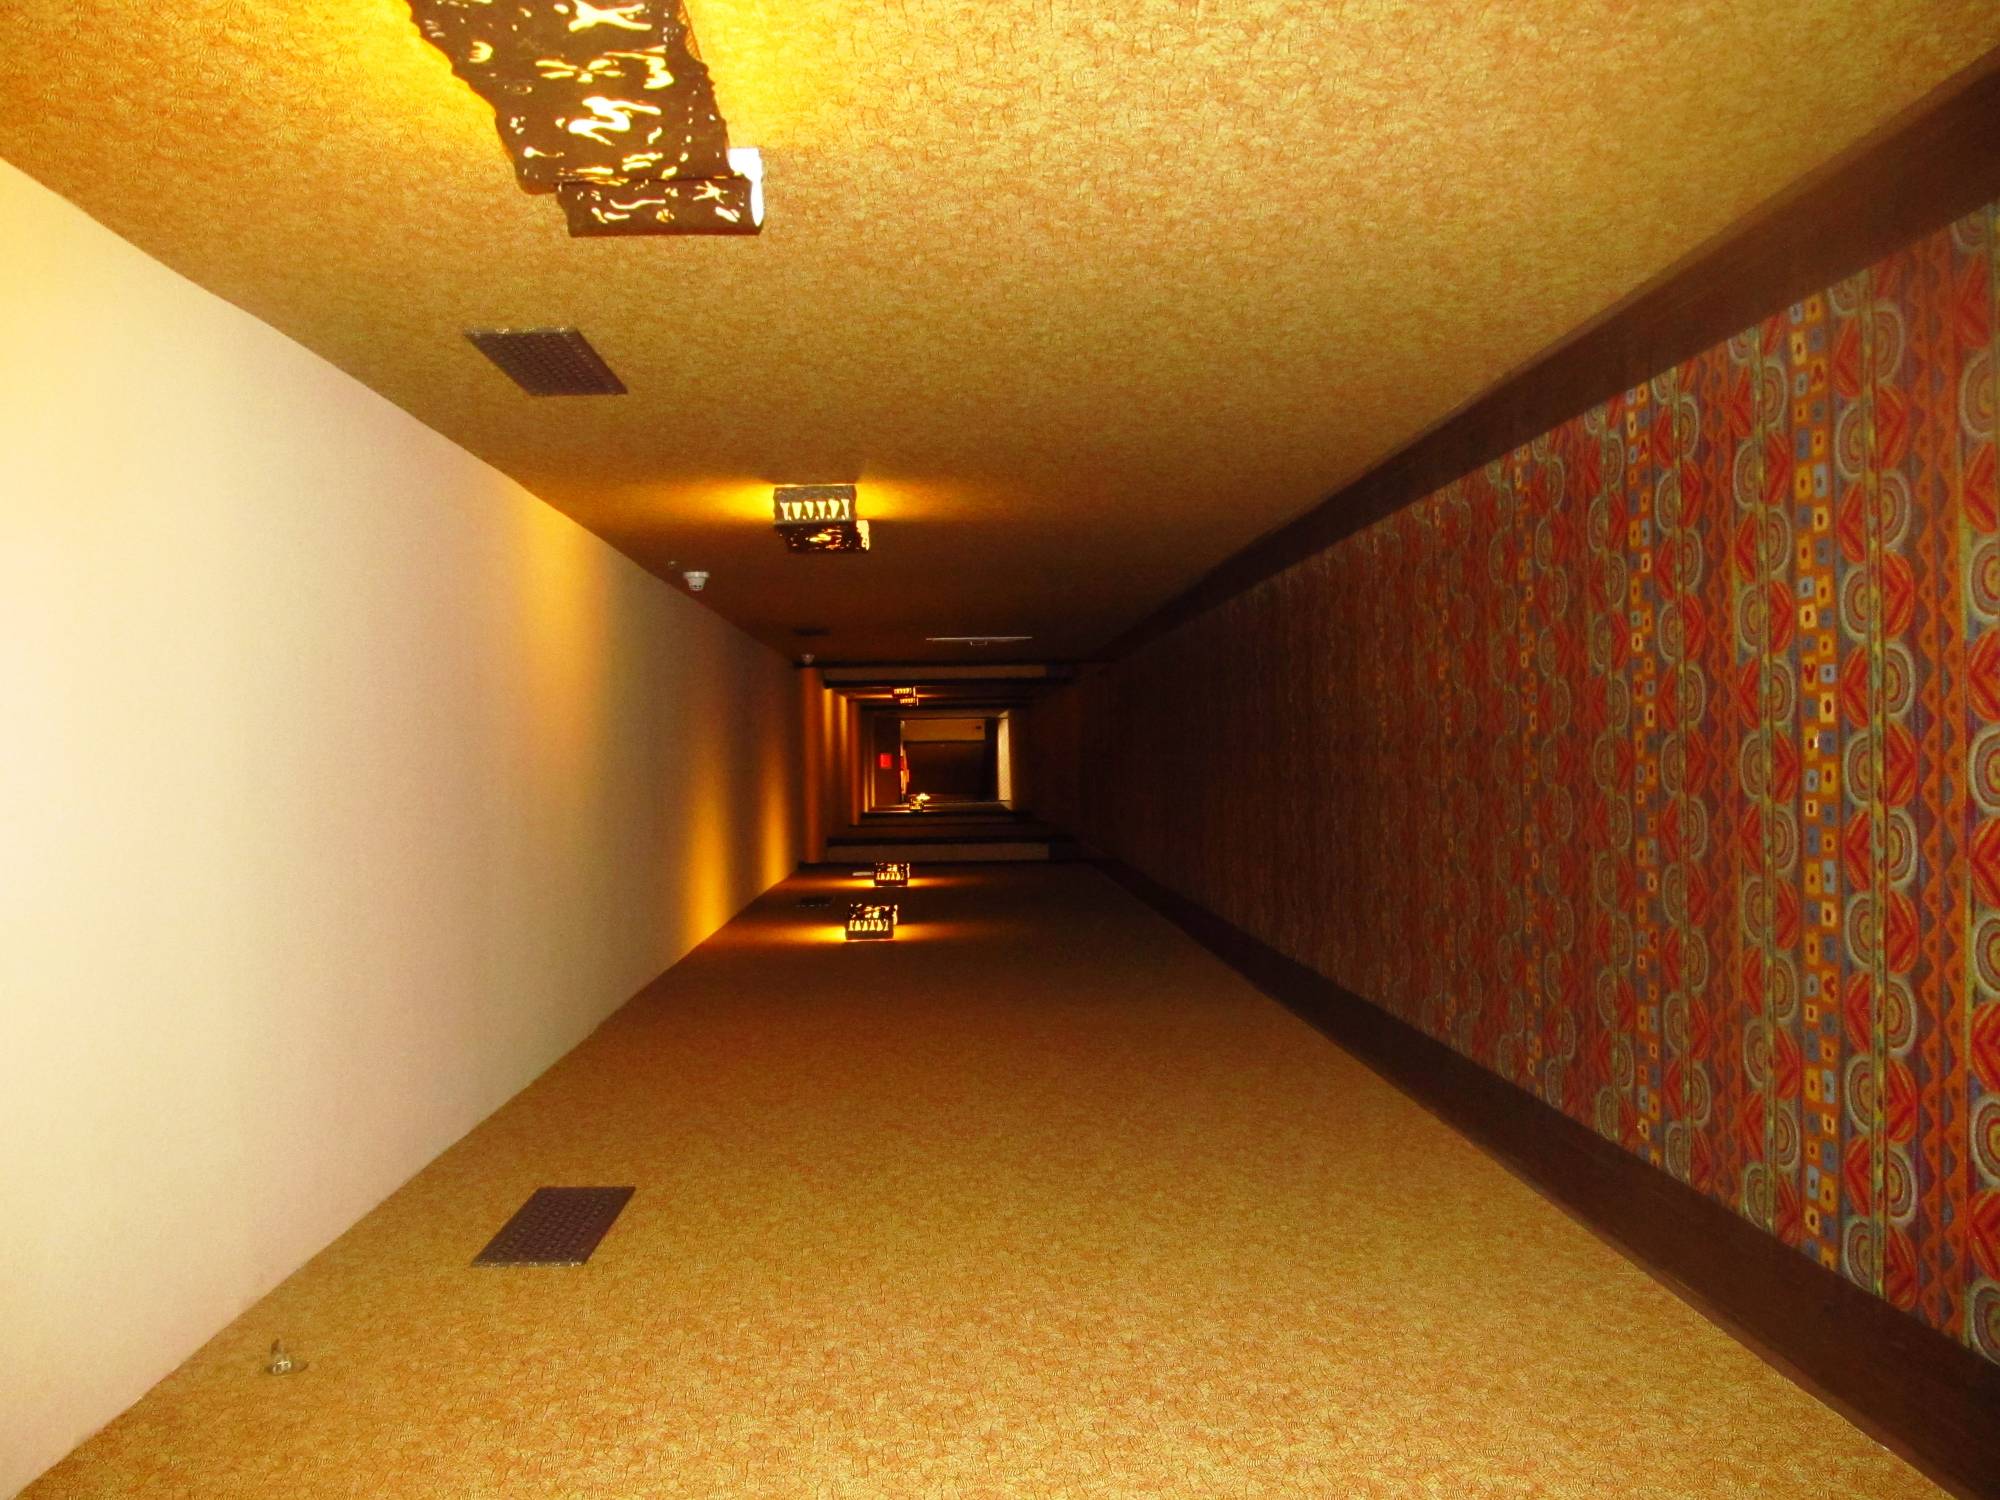 What a long hallway!